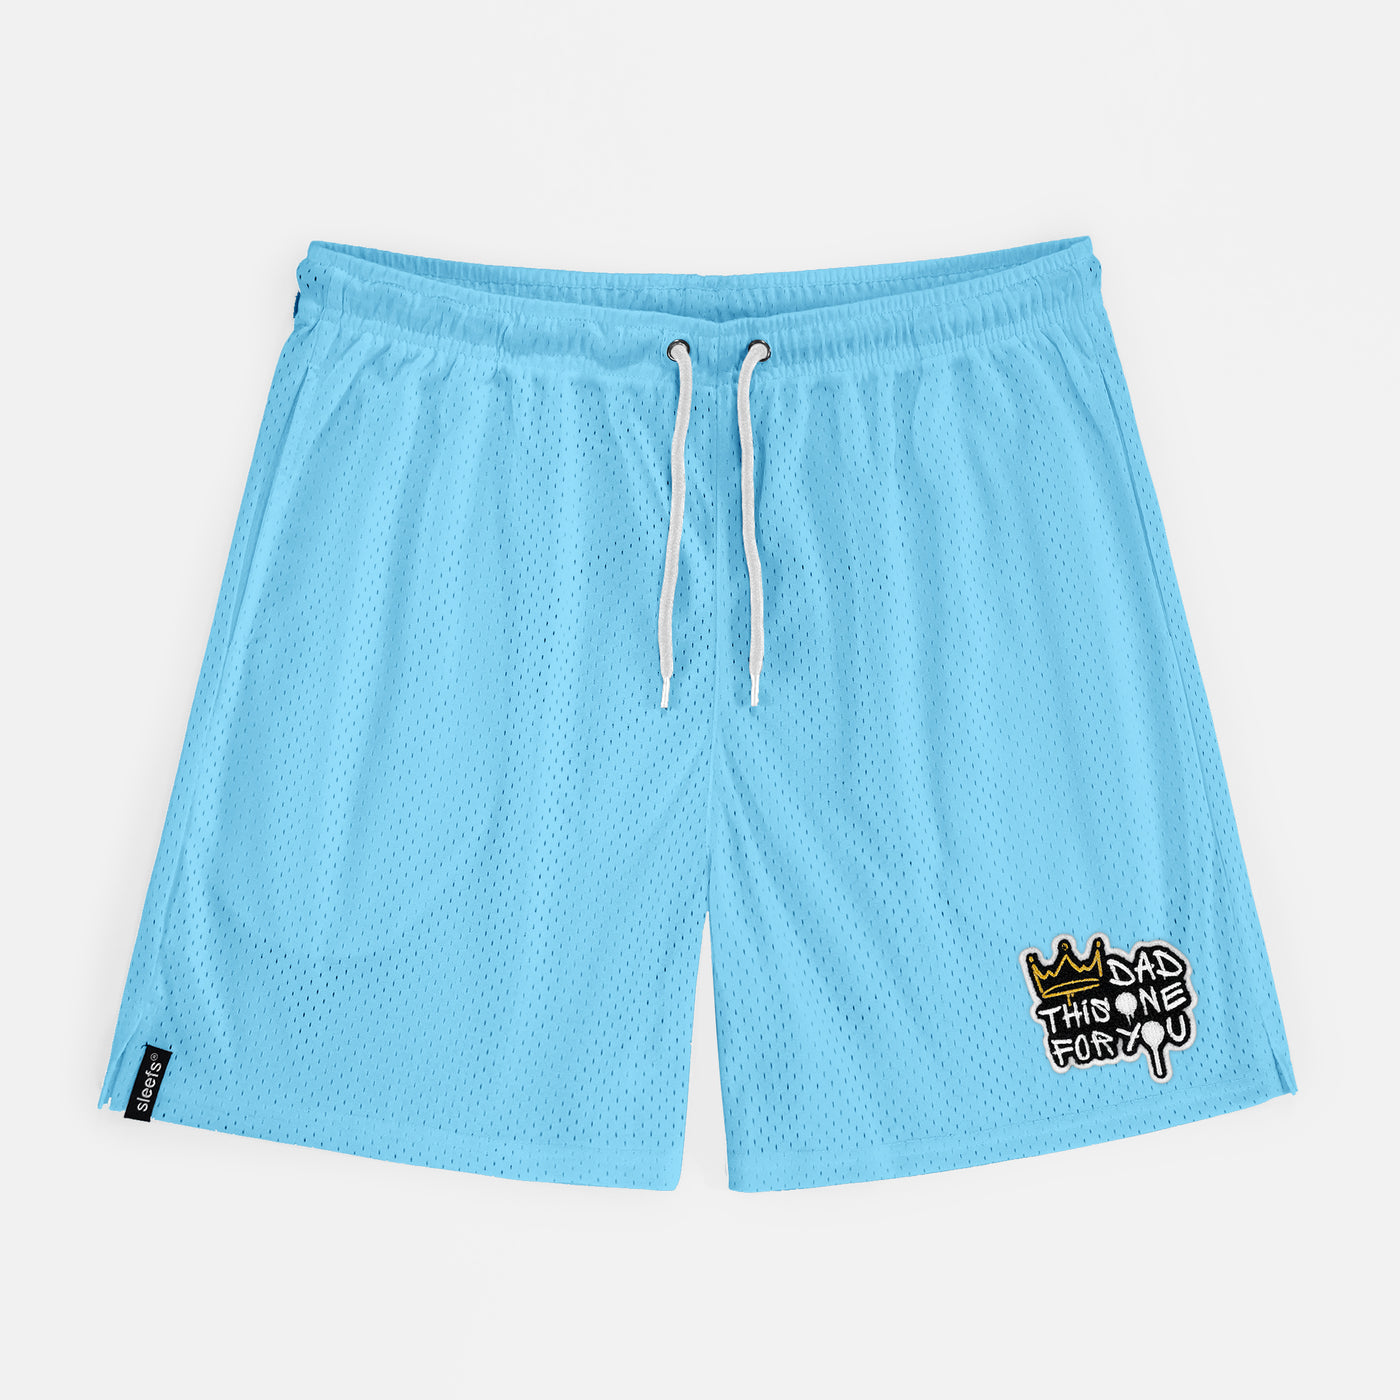 Dad This One For You Patch Shorts - 7"